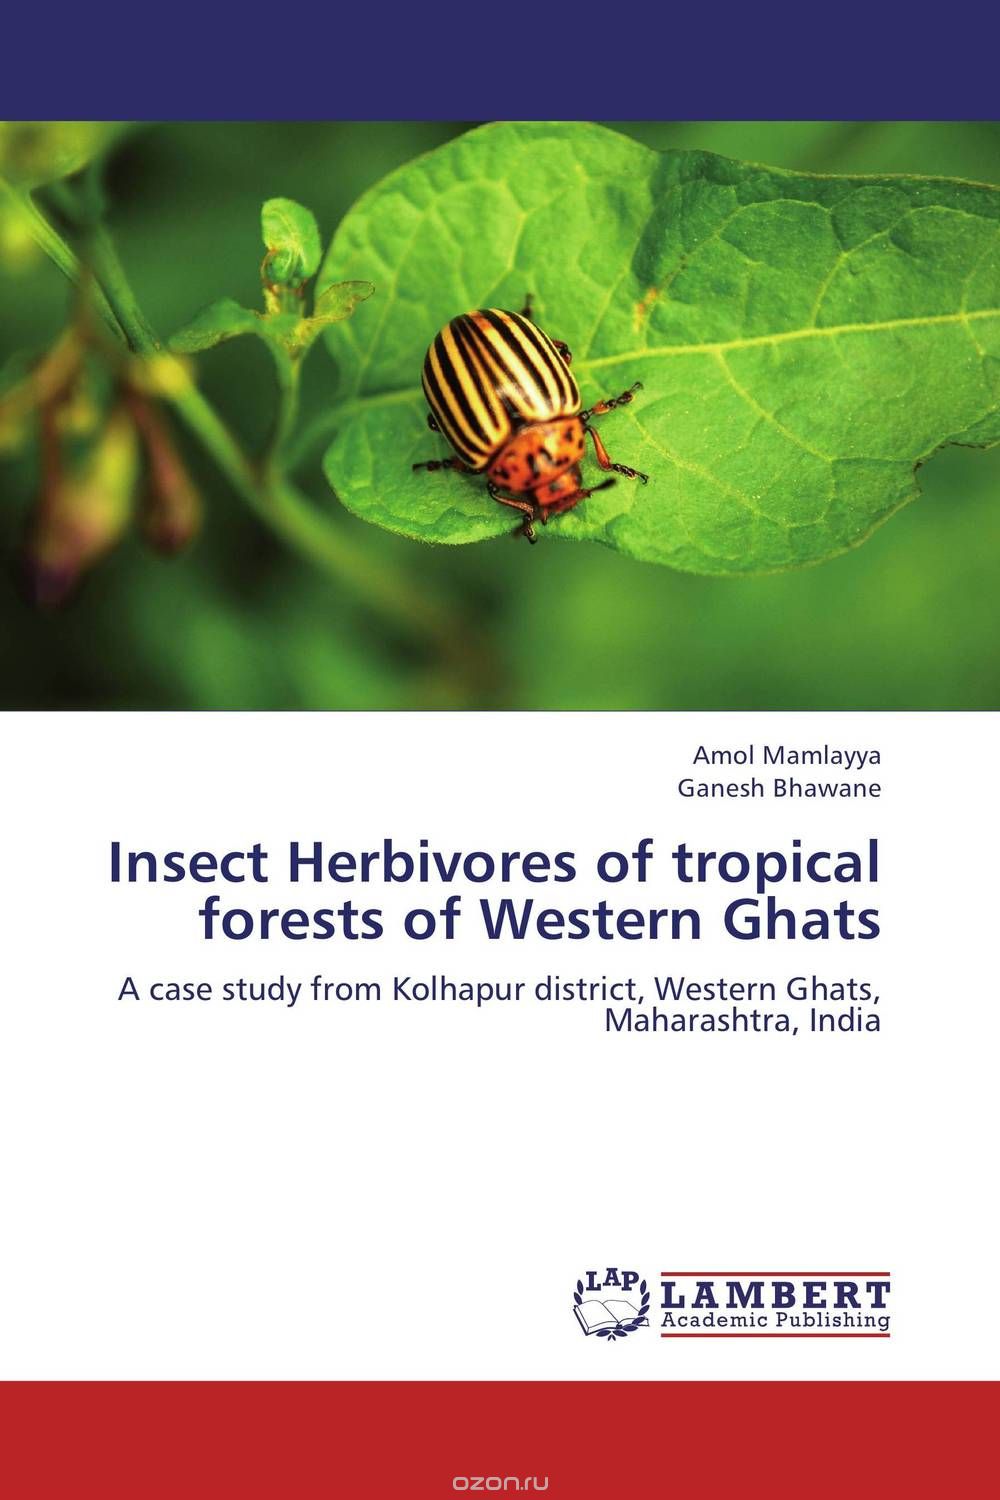 Insect Herbivores of tropical forests of Western Ghats